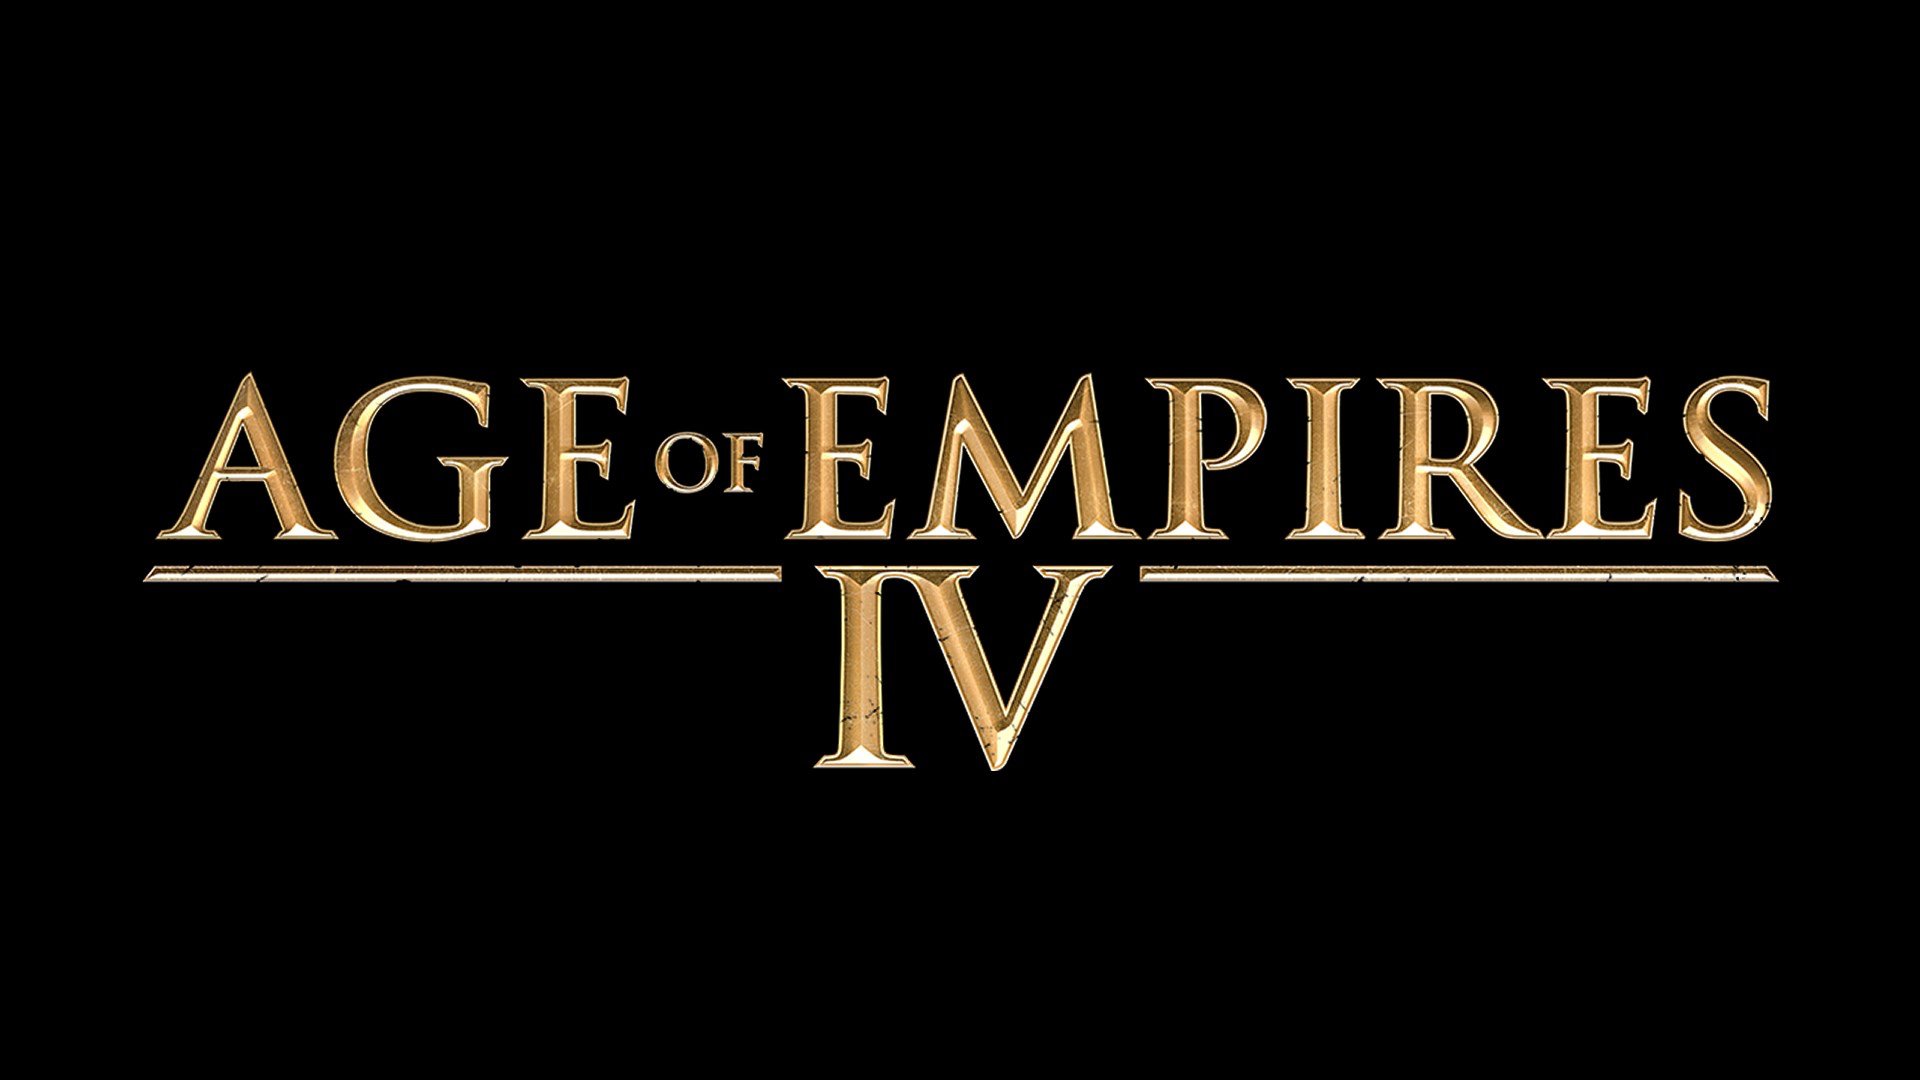 Video Game Age of Empires IV HD Wallpaper | Background Image